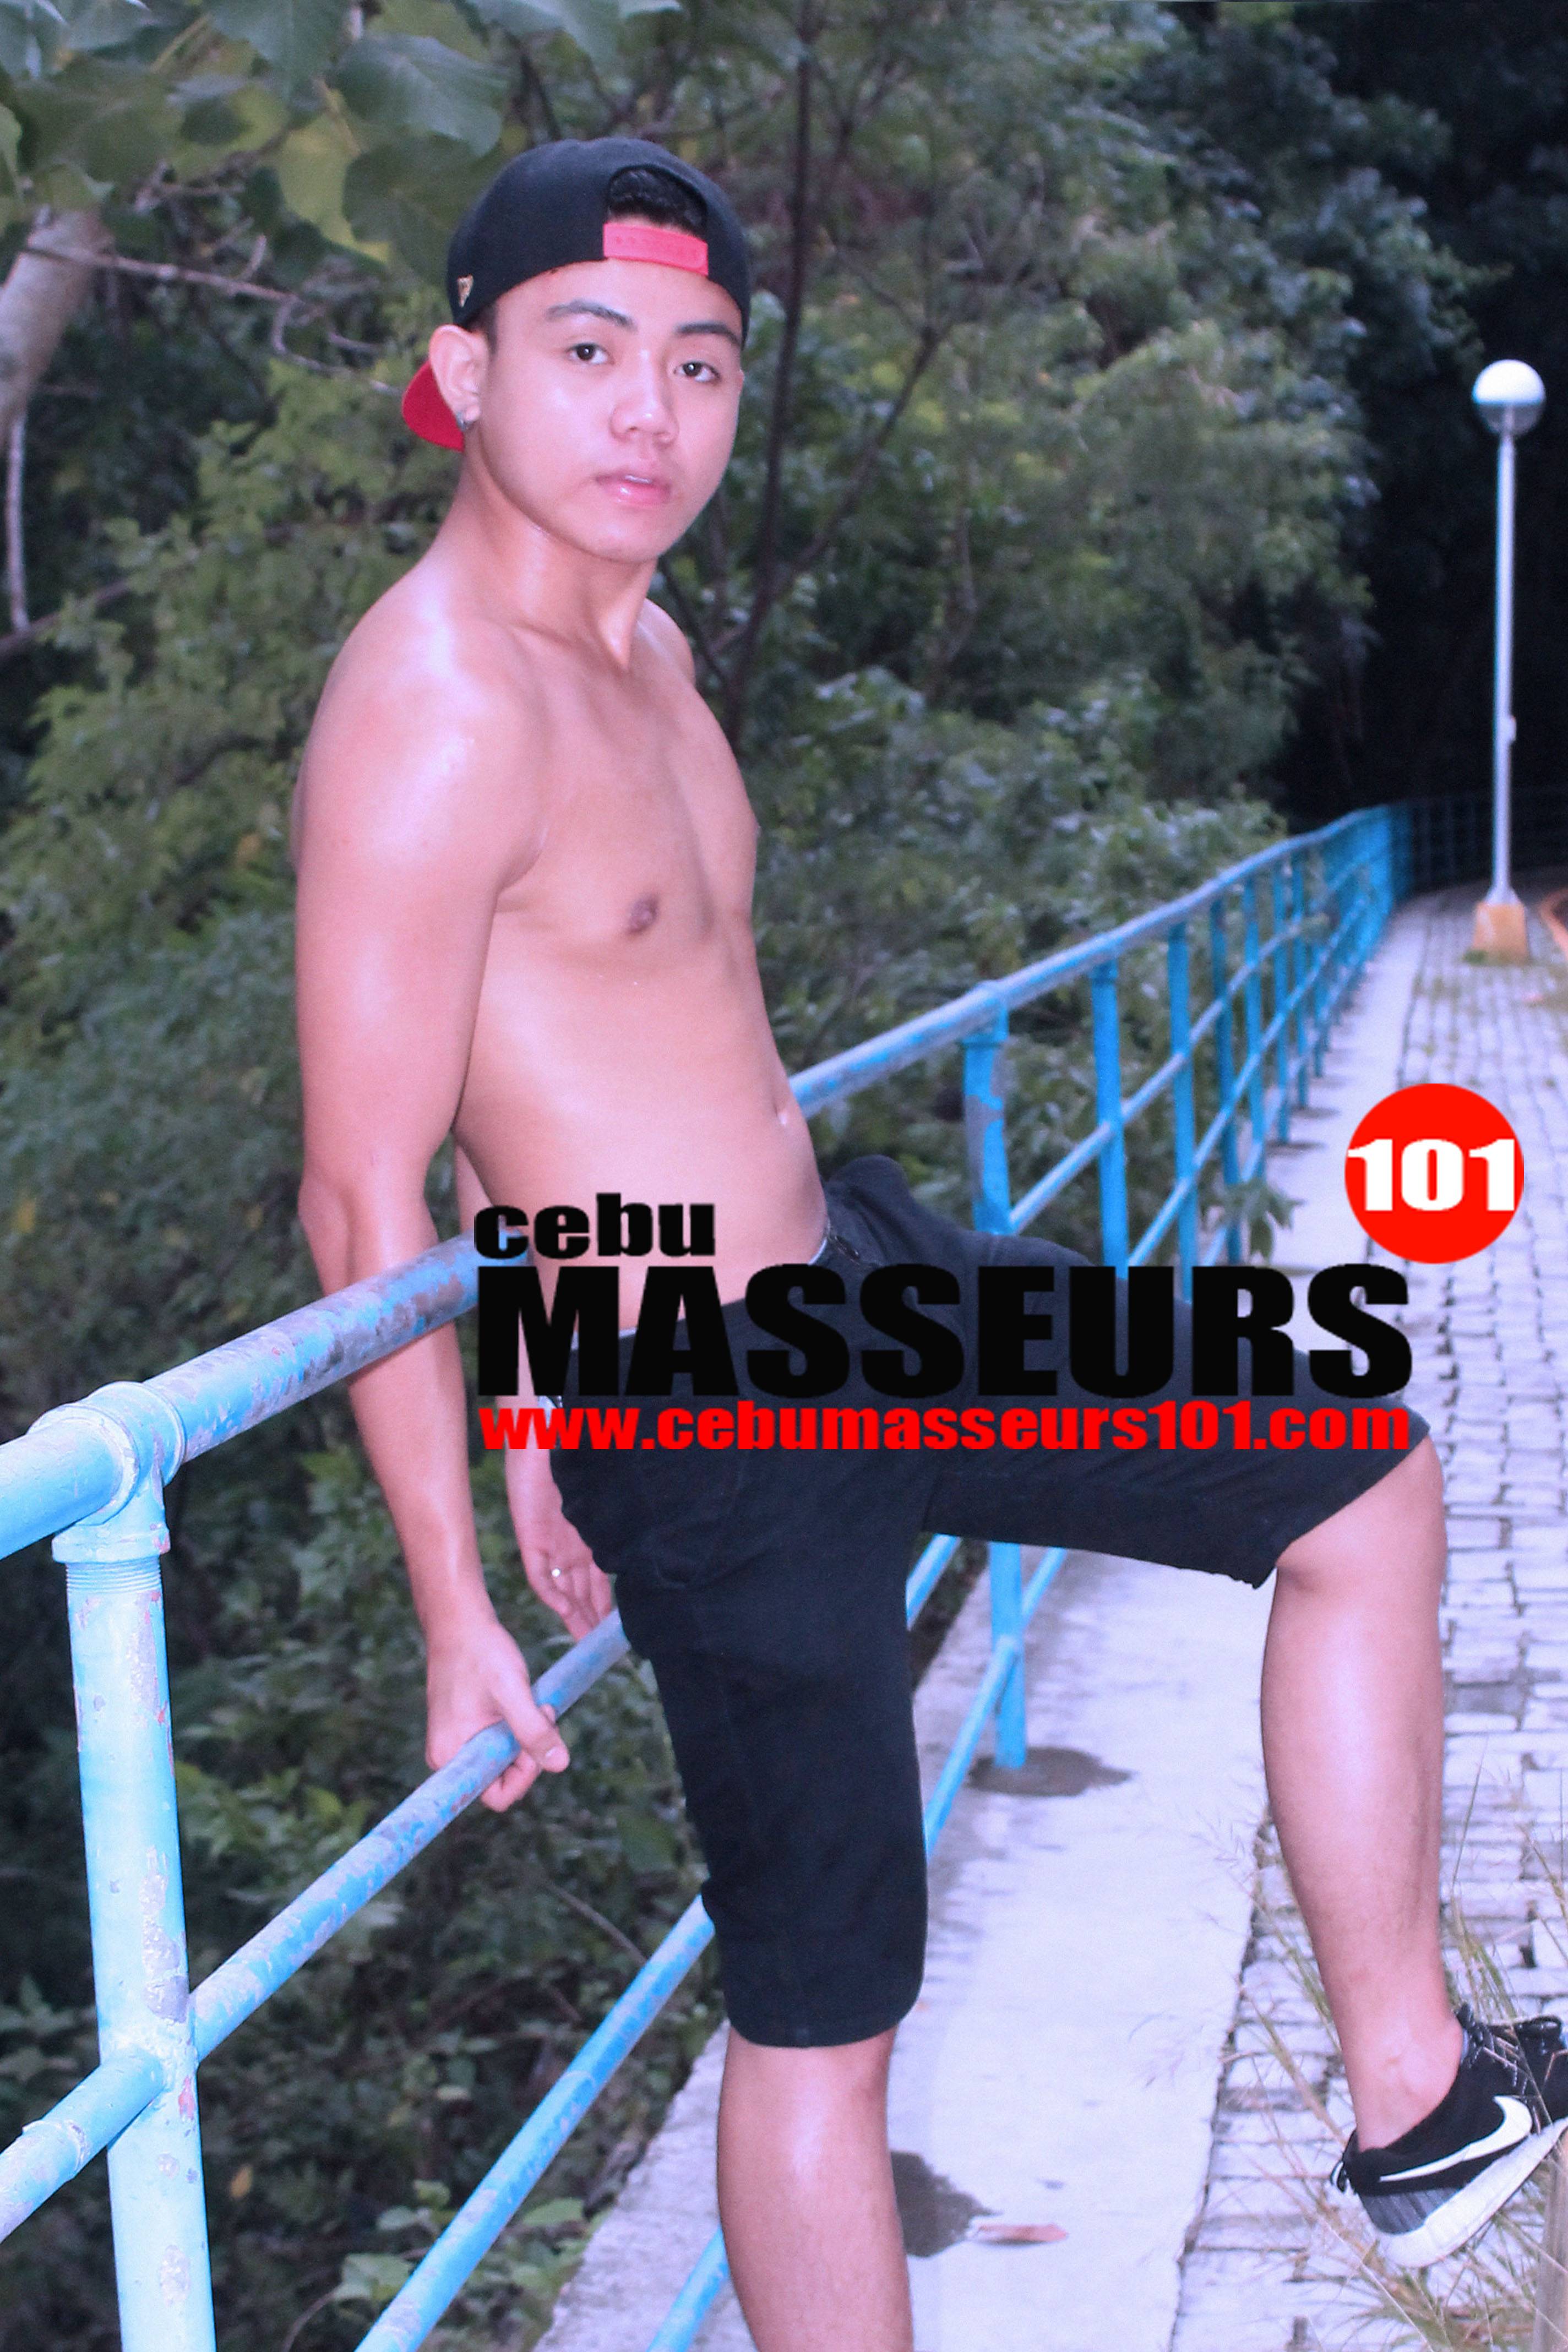 KEITH | Age: 19 | Height: 5'9" | Contact No.: 0912.332.4444 | LL: 032 - 350 - 9125 | Email Us: cebumasseurs101@gmail.com Ads by: Masseurs101